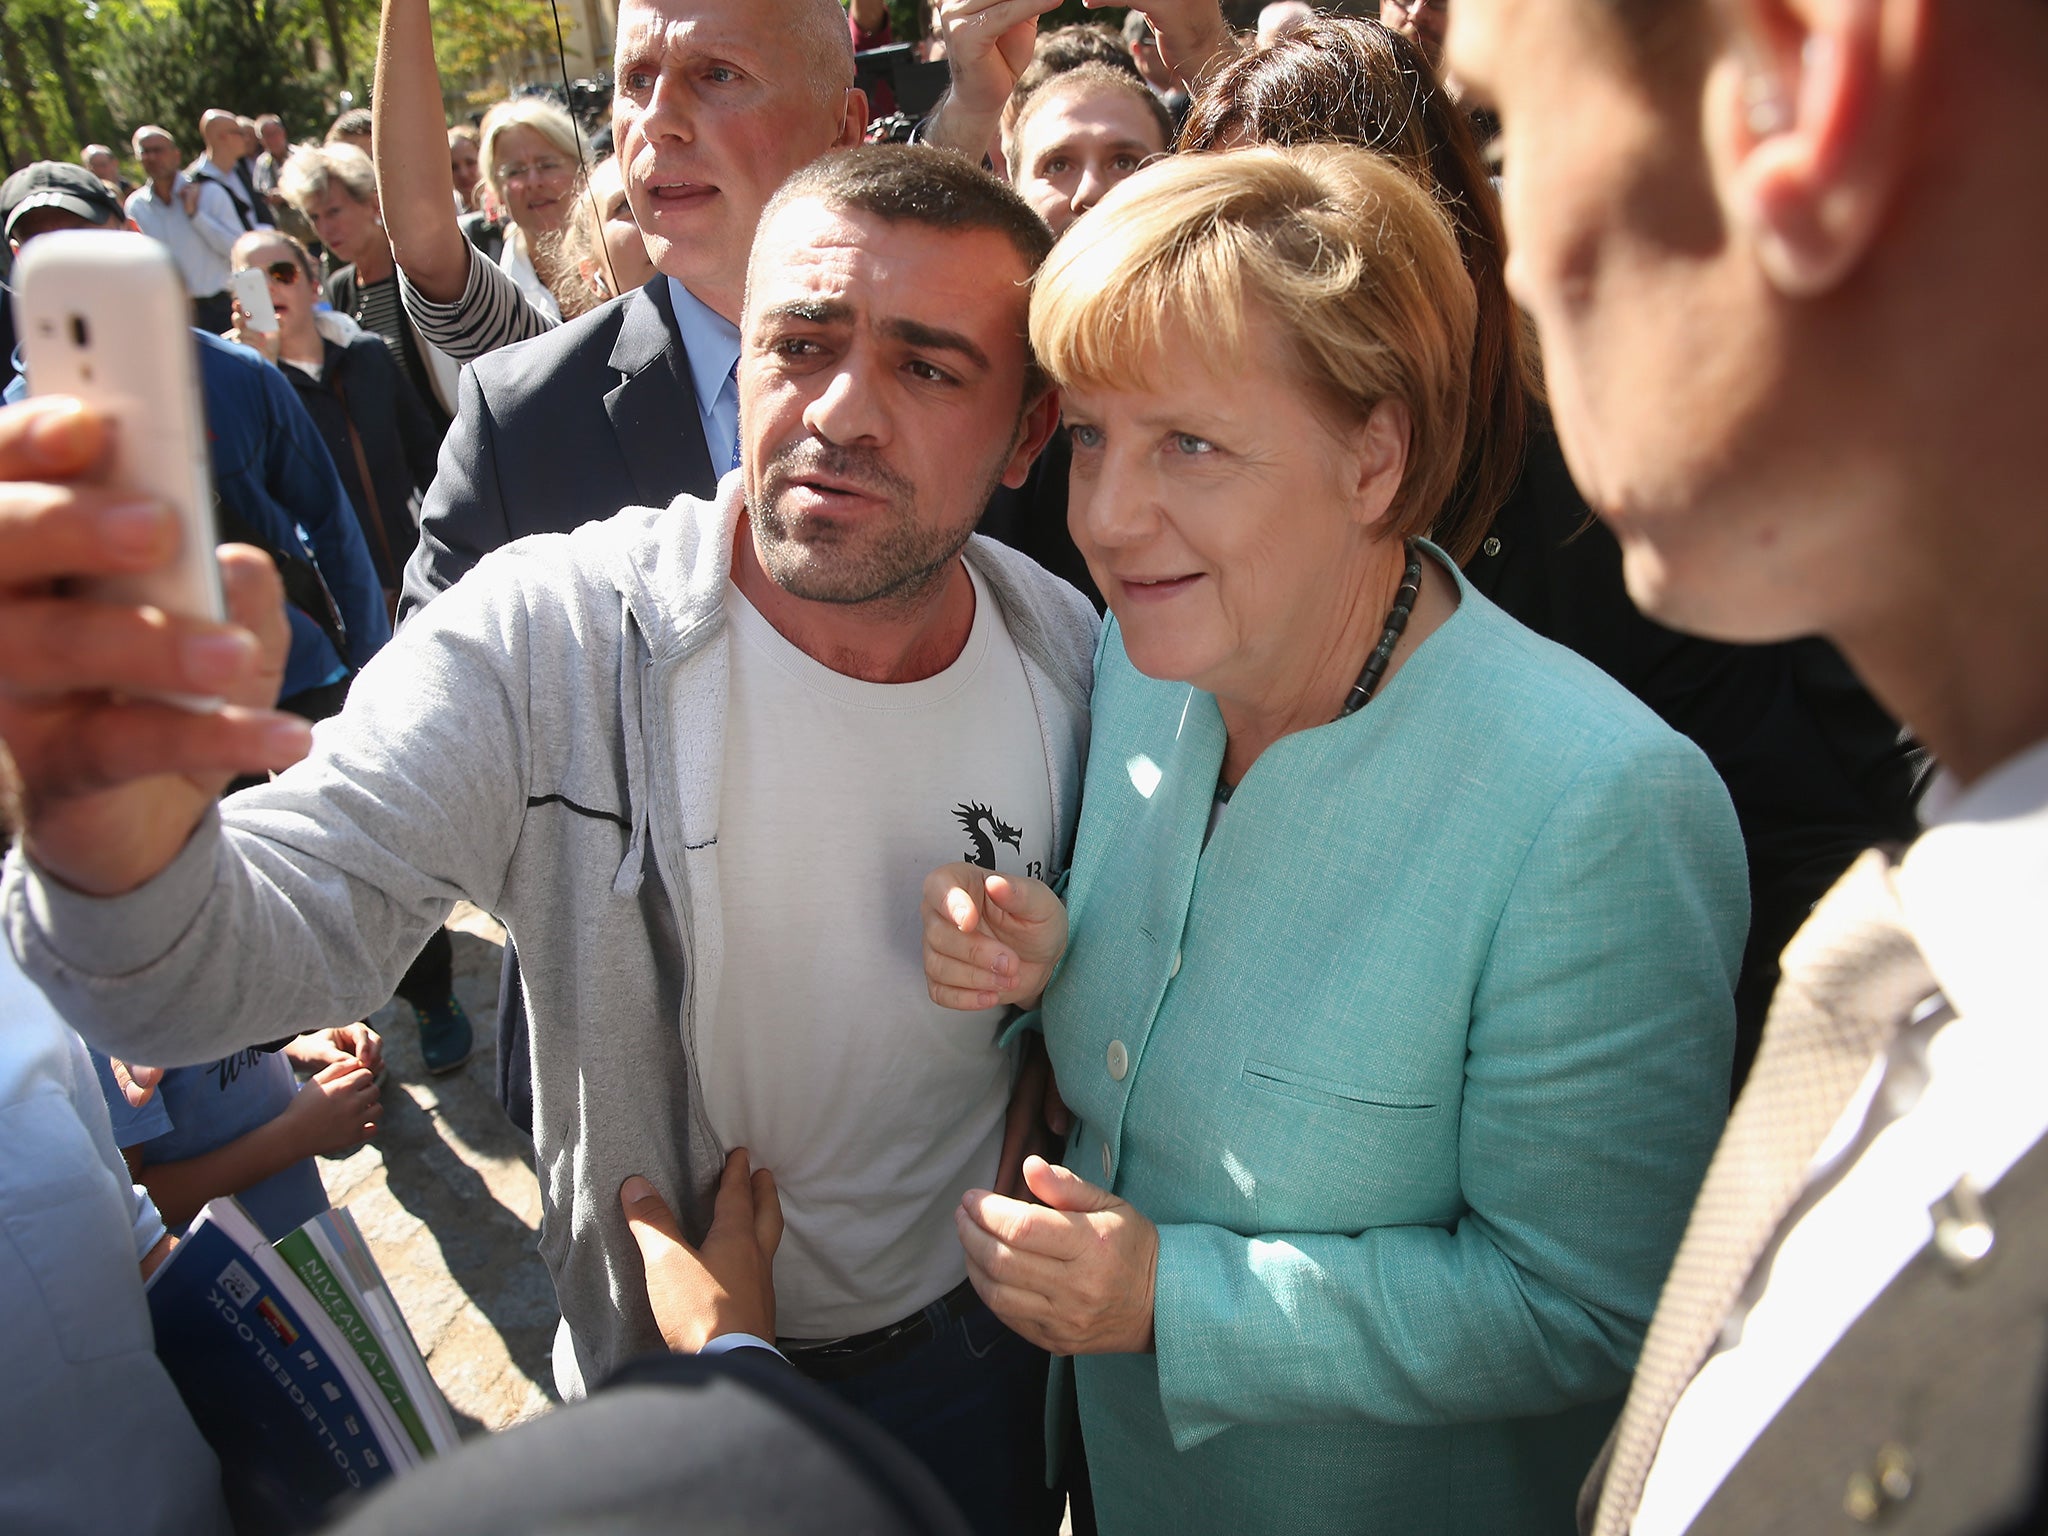 Angela Merkel poses for a selfie with a refugee after visiting a shelter for migrants in Berlin